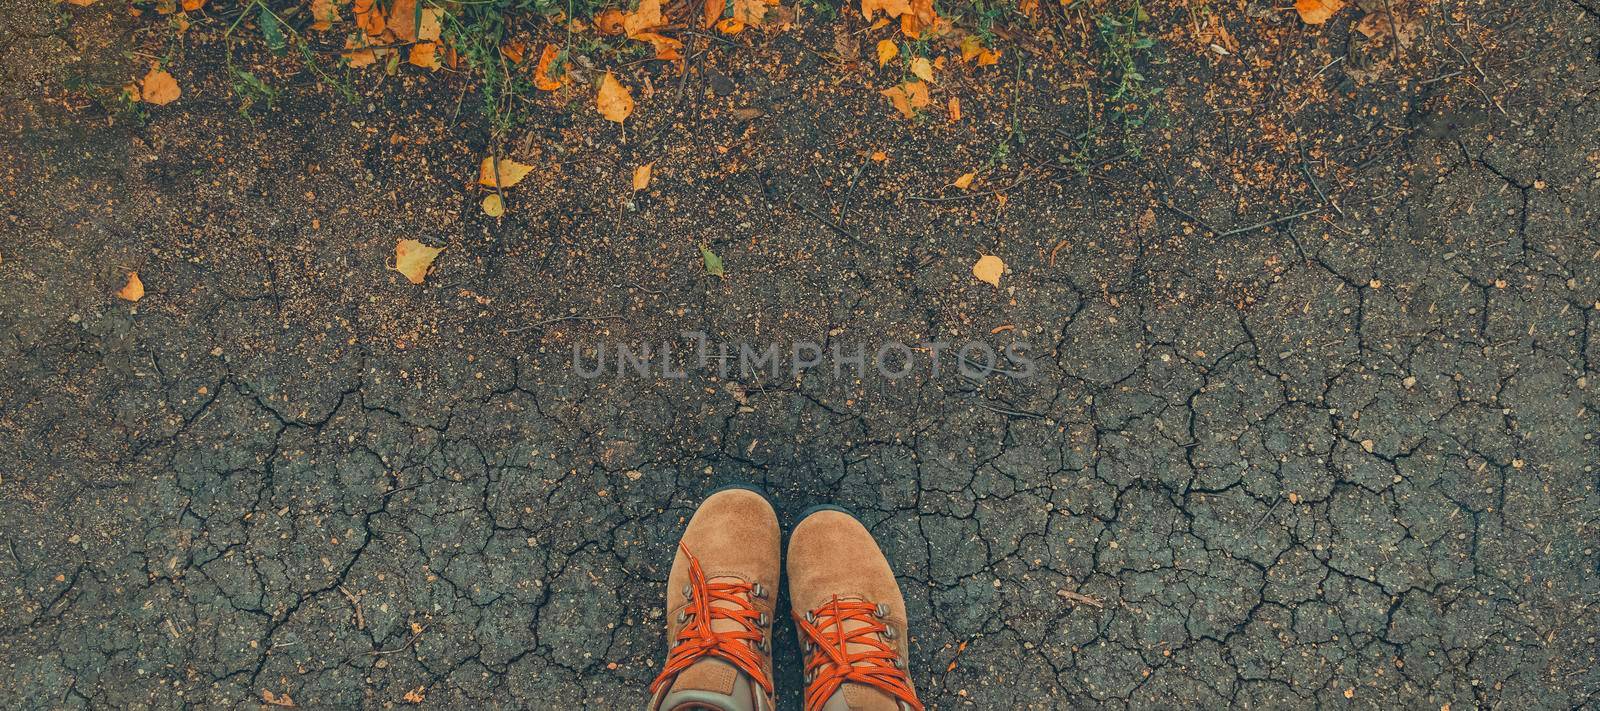 banner with Casual unisex boots with bright laces and colorful autumn fallen leaves. Toned. Autumn fall scene. Legs in boots on dry earth and autumn leaves. Lifestyle Fashion trendy style.